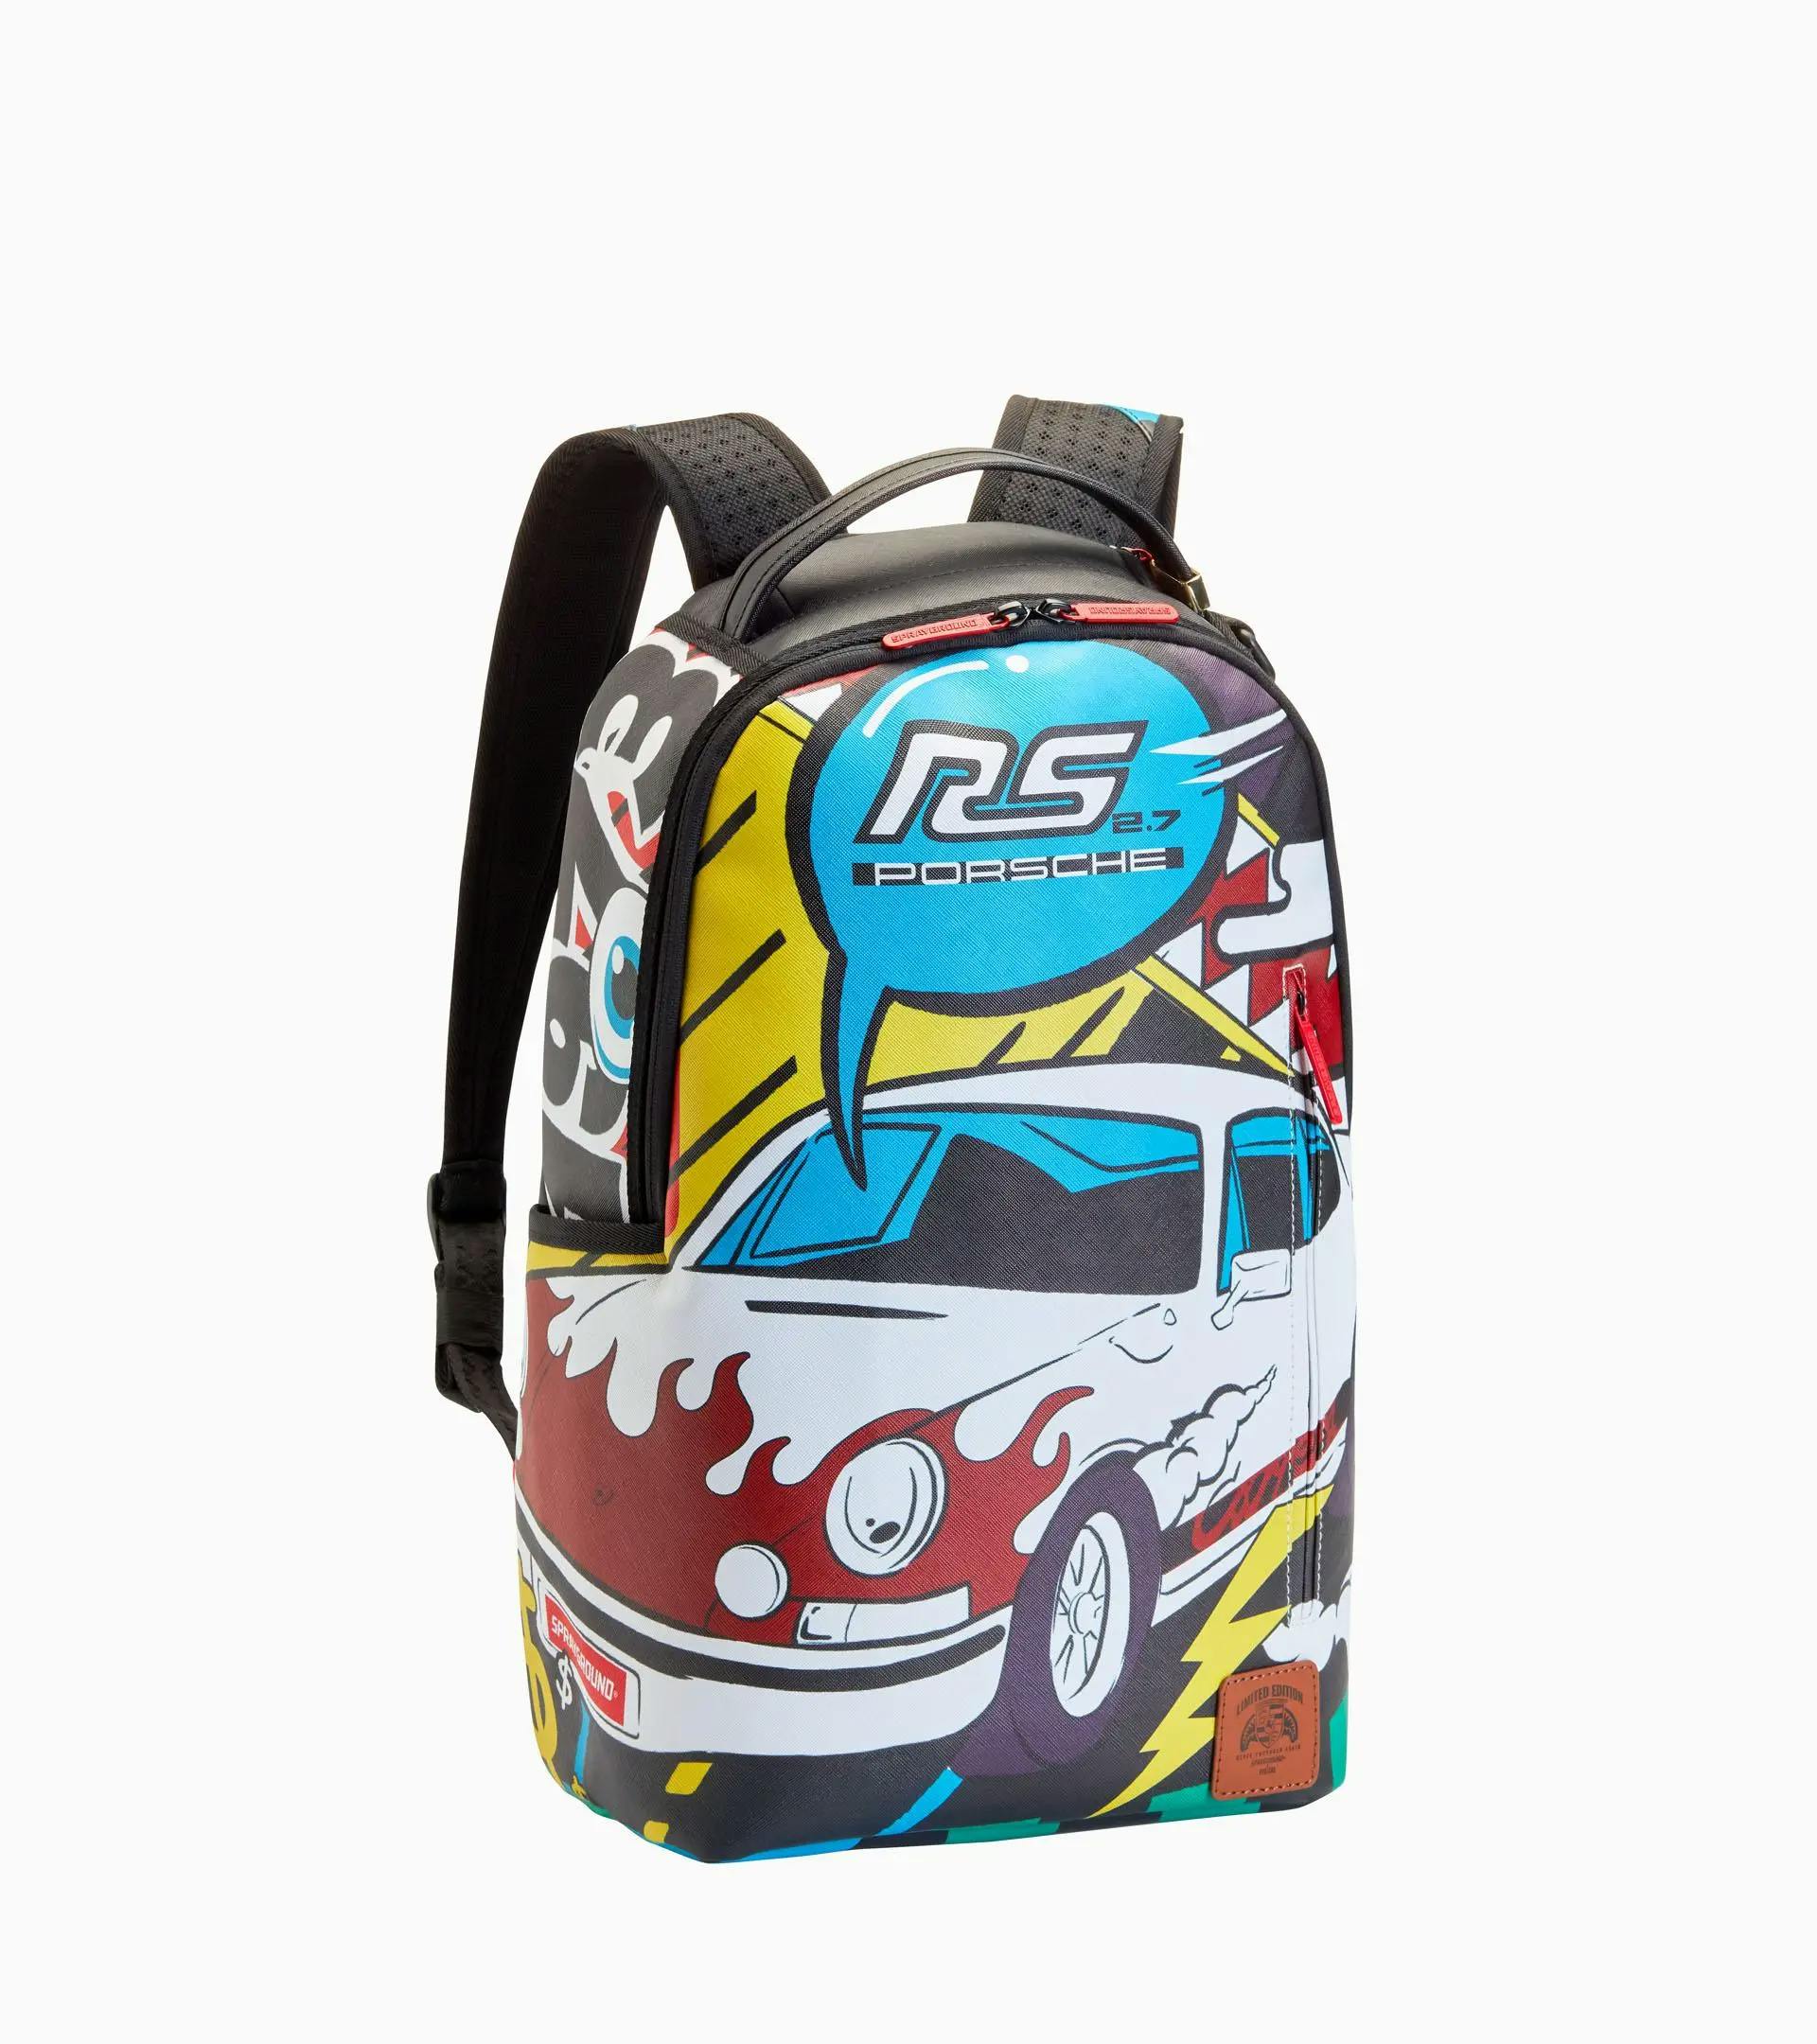 Sprayground, Bags, Selling A Spray Ground Backpack